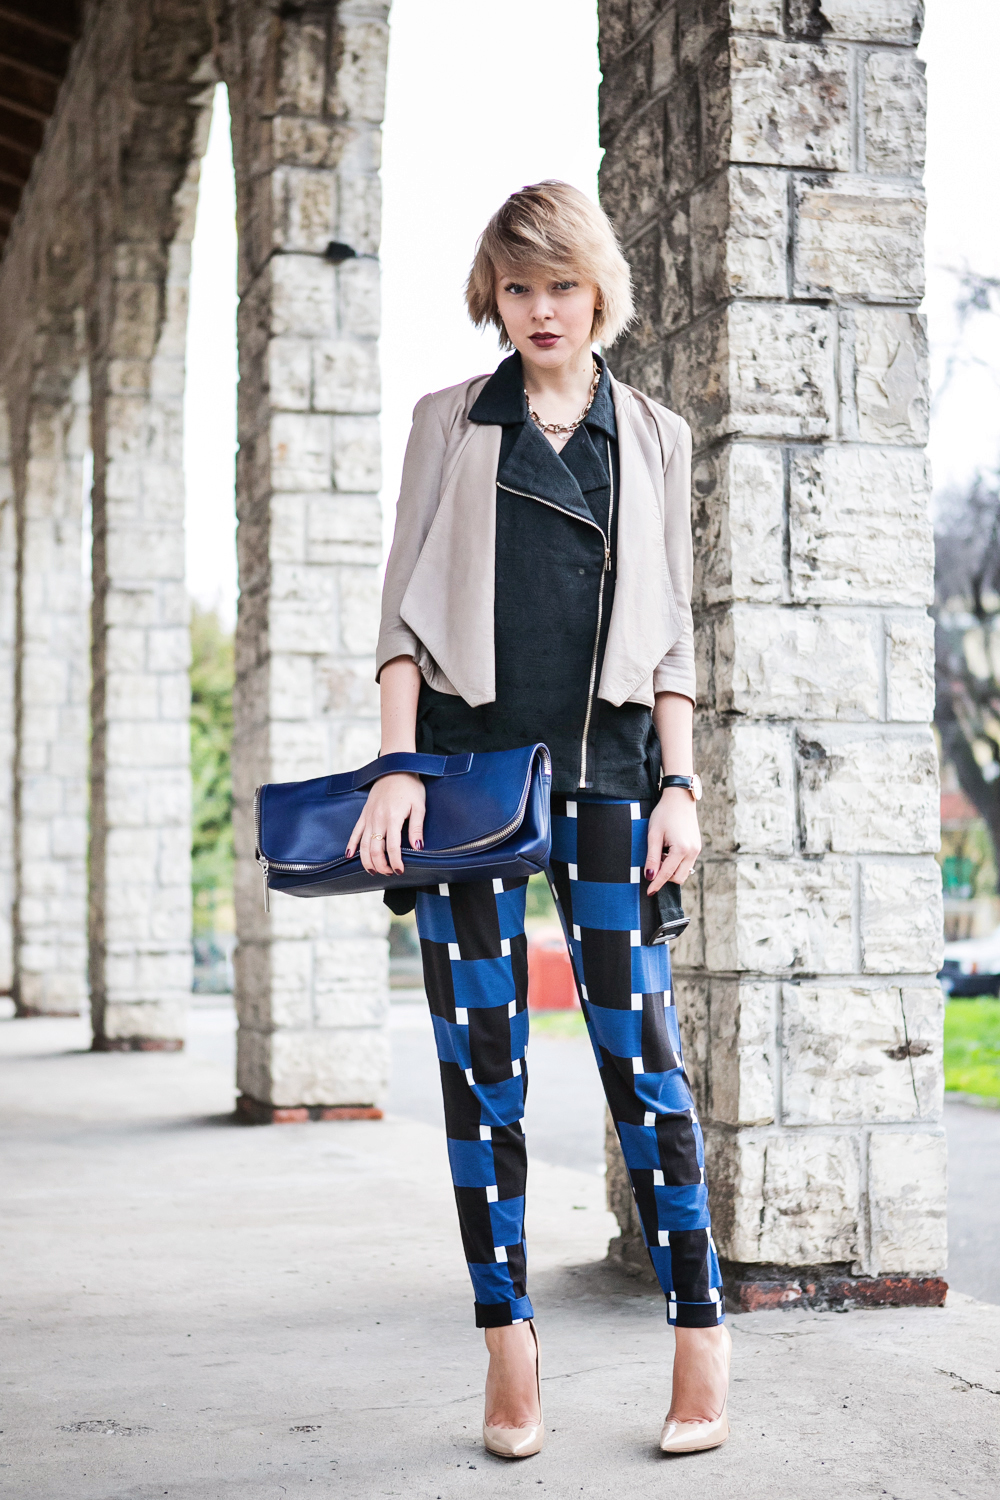 1darya kamalova thecablook fashion blog russian blogger italy moda street style pixie short hair fashion blogger 3 1 PHIPPIP LIM MINUTE BAG NAVY asos pants as by df leather jacket chicwish vest jimmy choo anouk nude heels daniel wellington watches-7